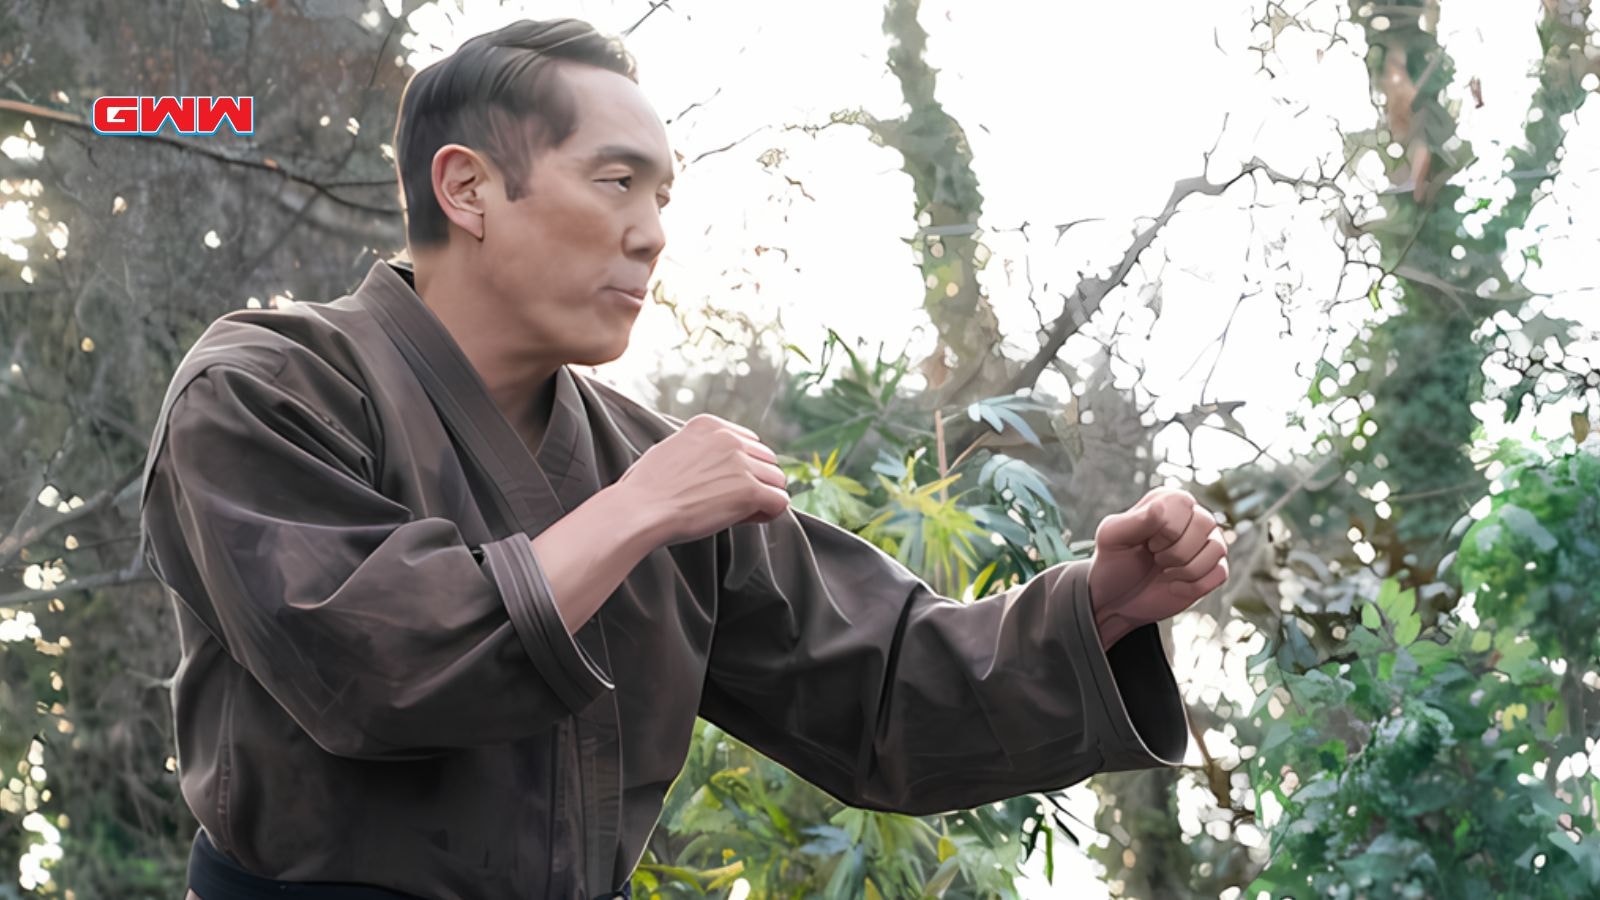 Chozen in martial arts attire posing outdoors, surrounded by greenery.